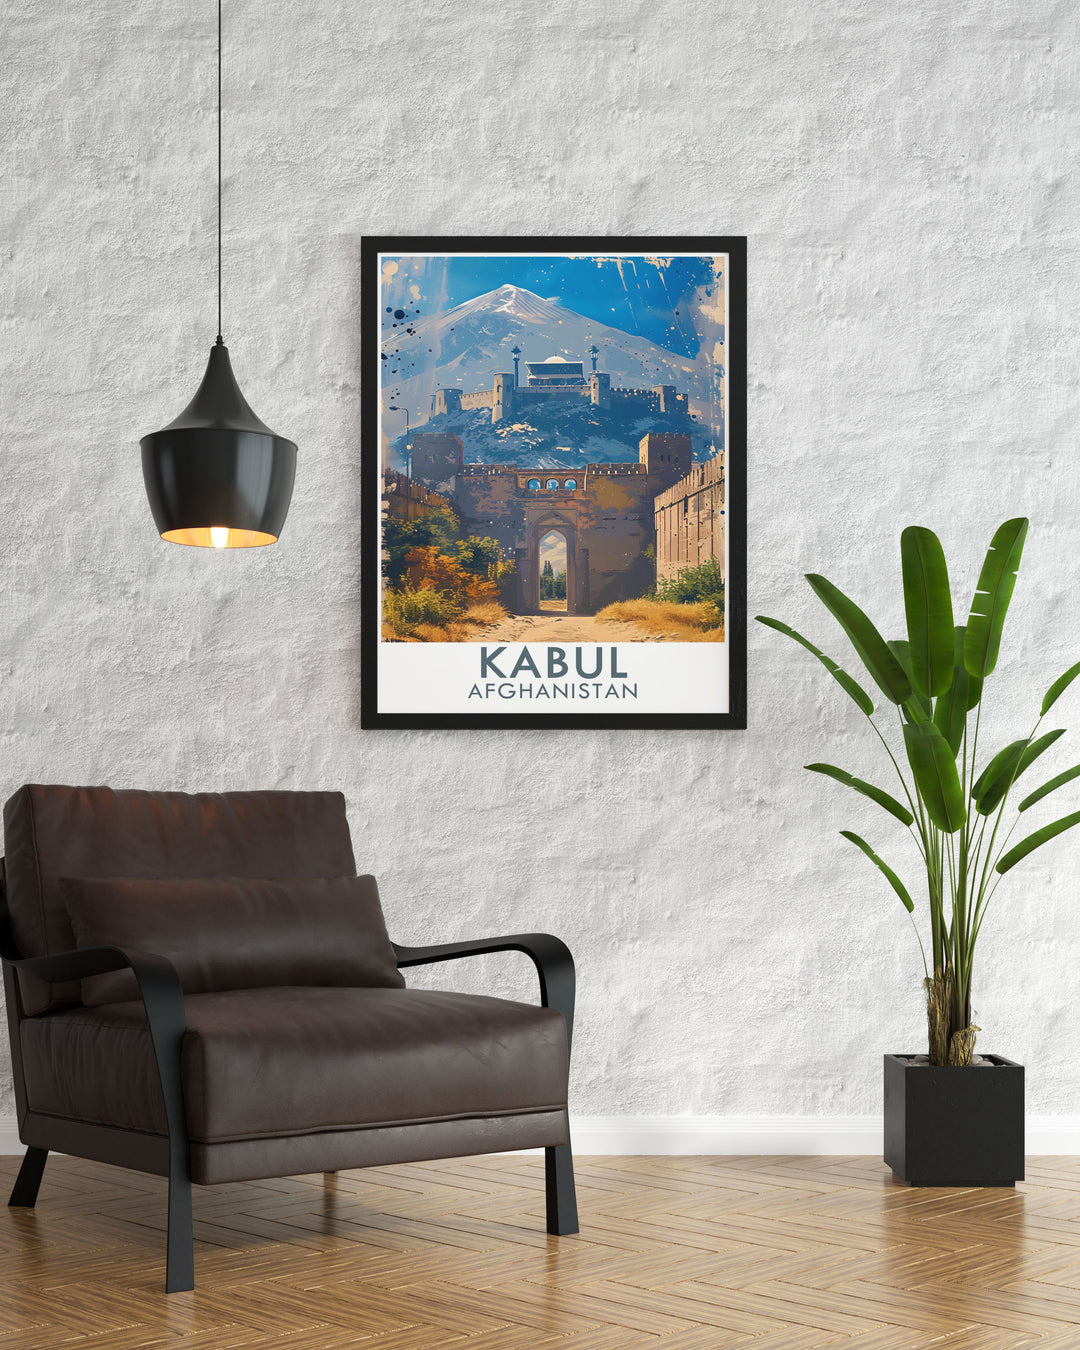 An elegant art print featuring the Kabul Citadel, highlighting the intricate designs and historical relevance of the fortress. The colorful illustration brings the citadels story to life, perfect for any art collection.